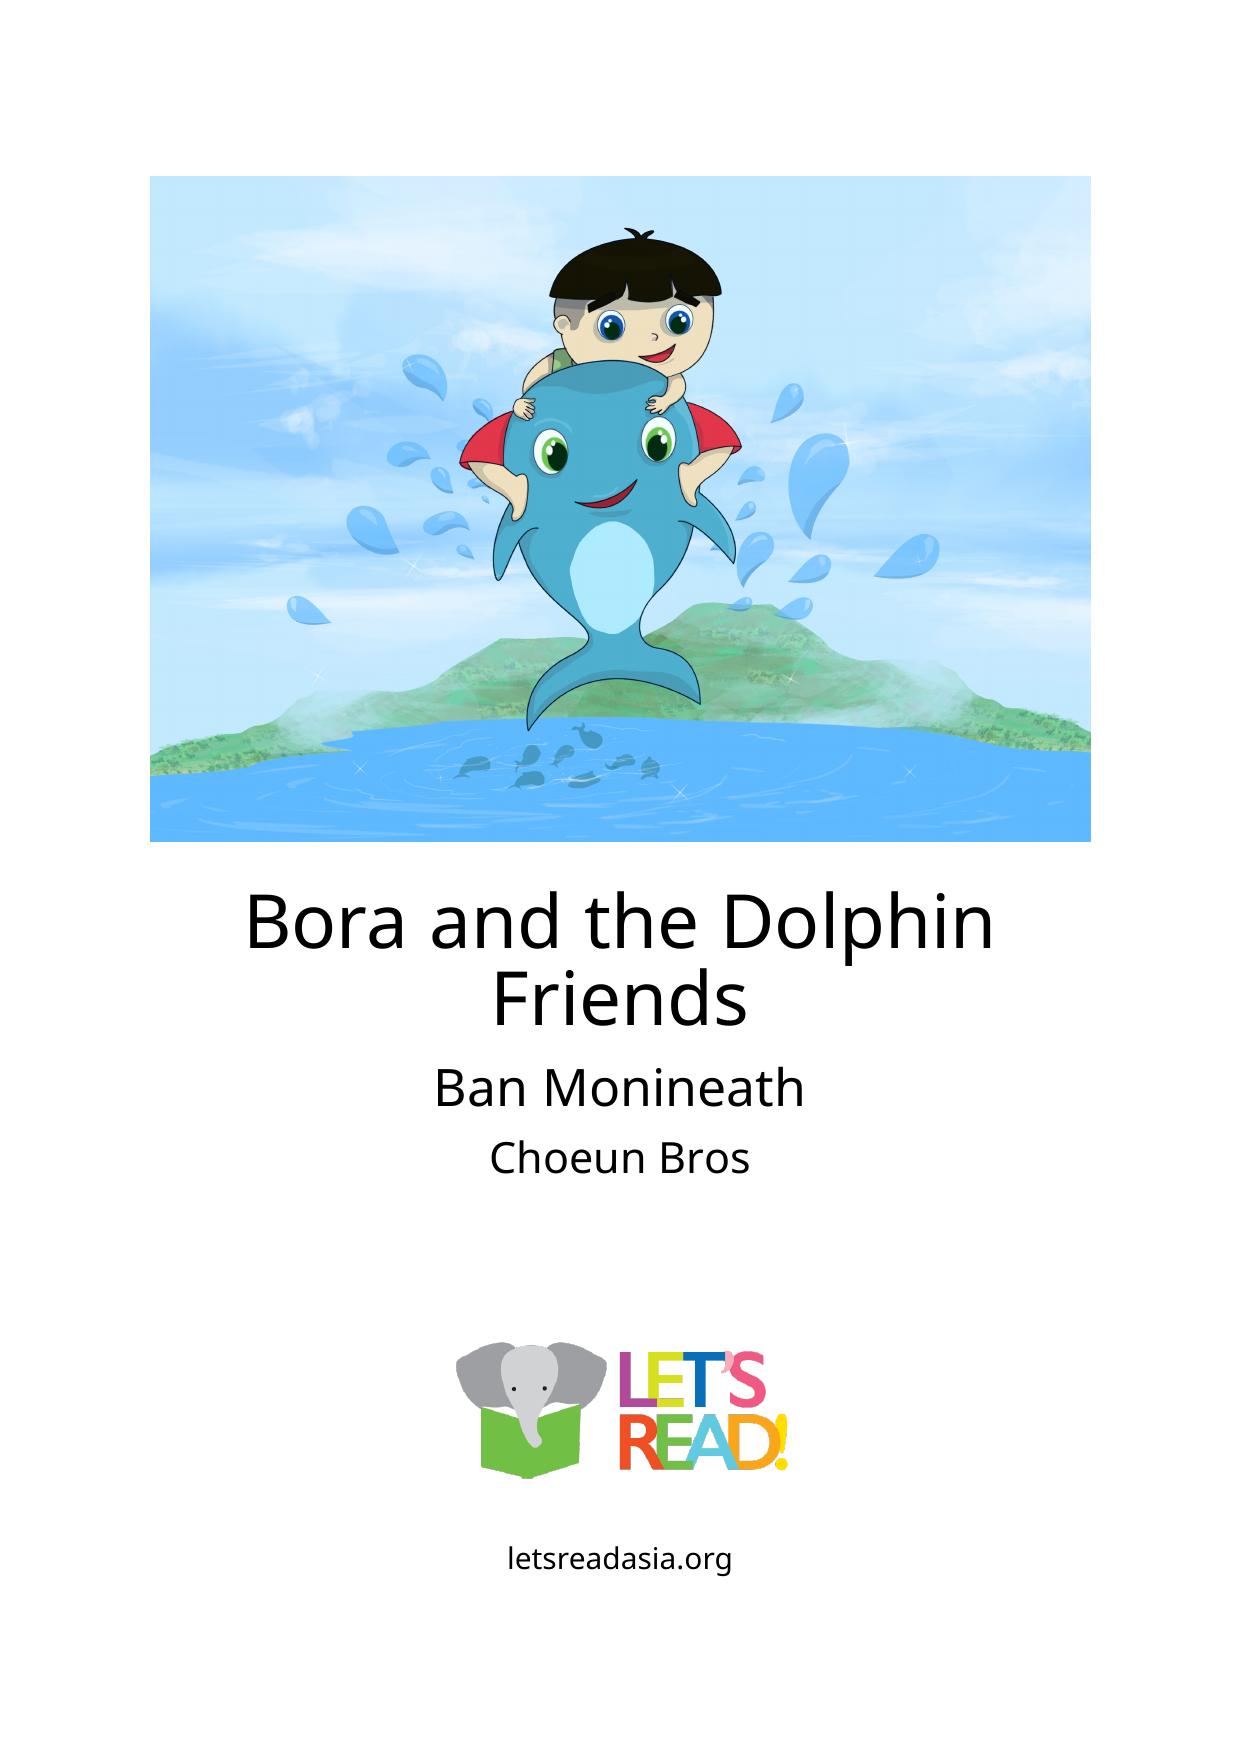 Bora and the Dolphin Friends